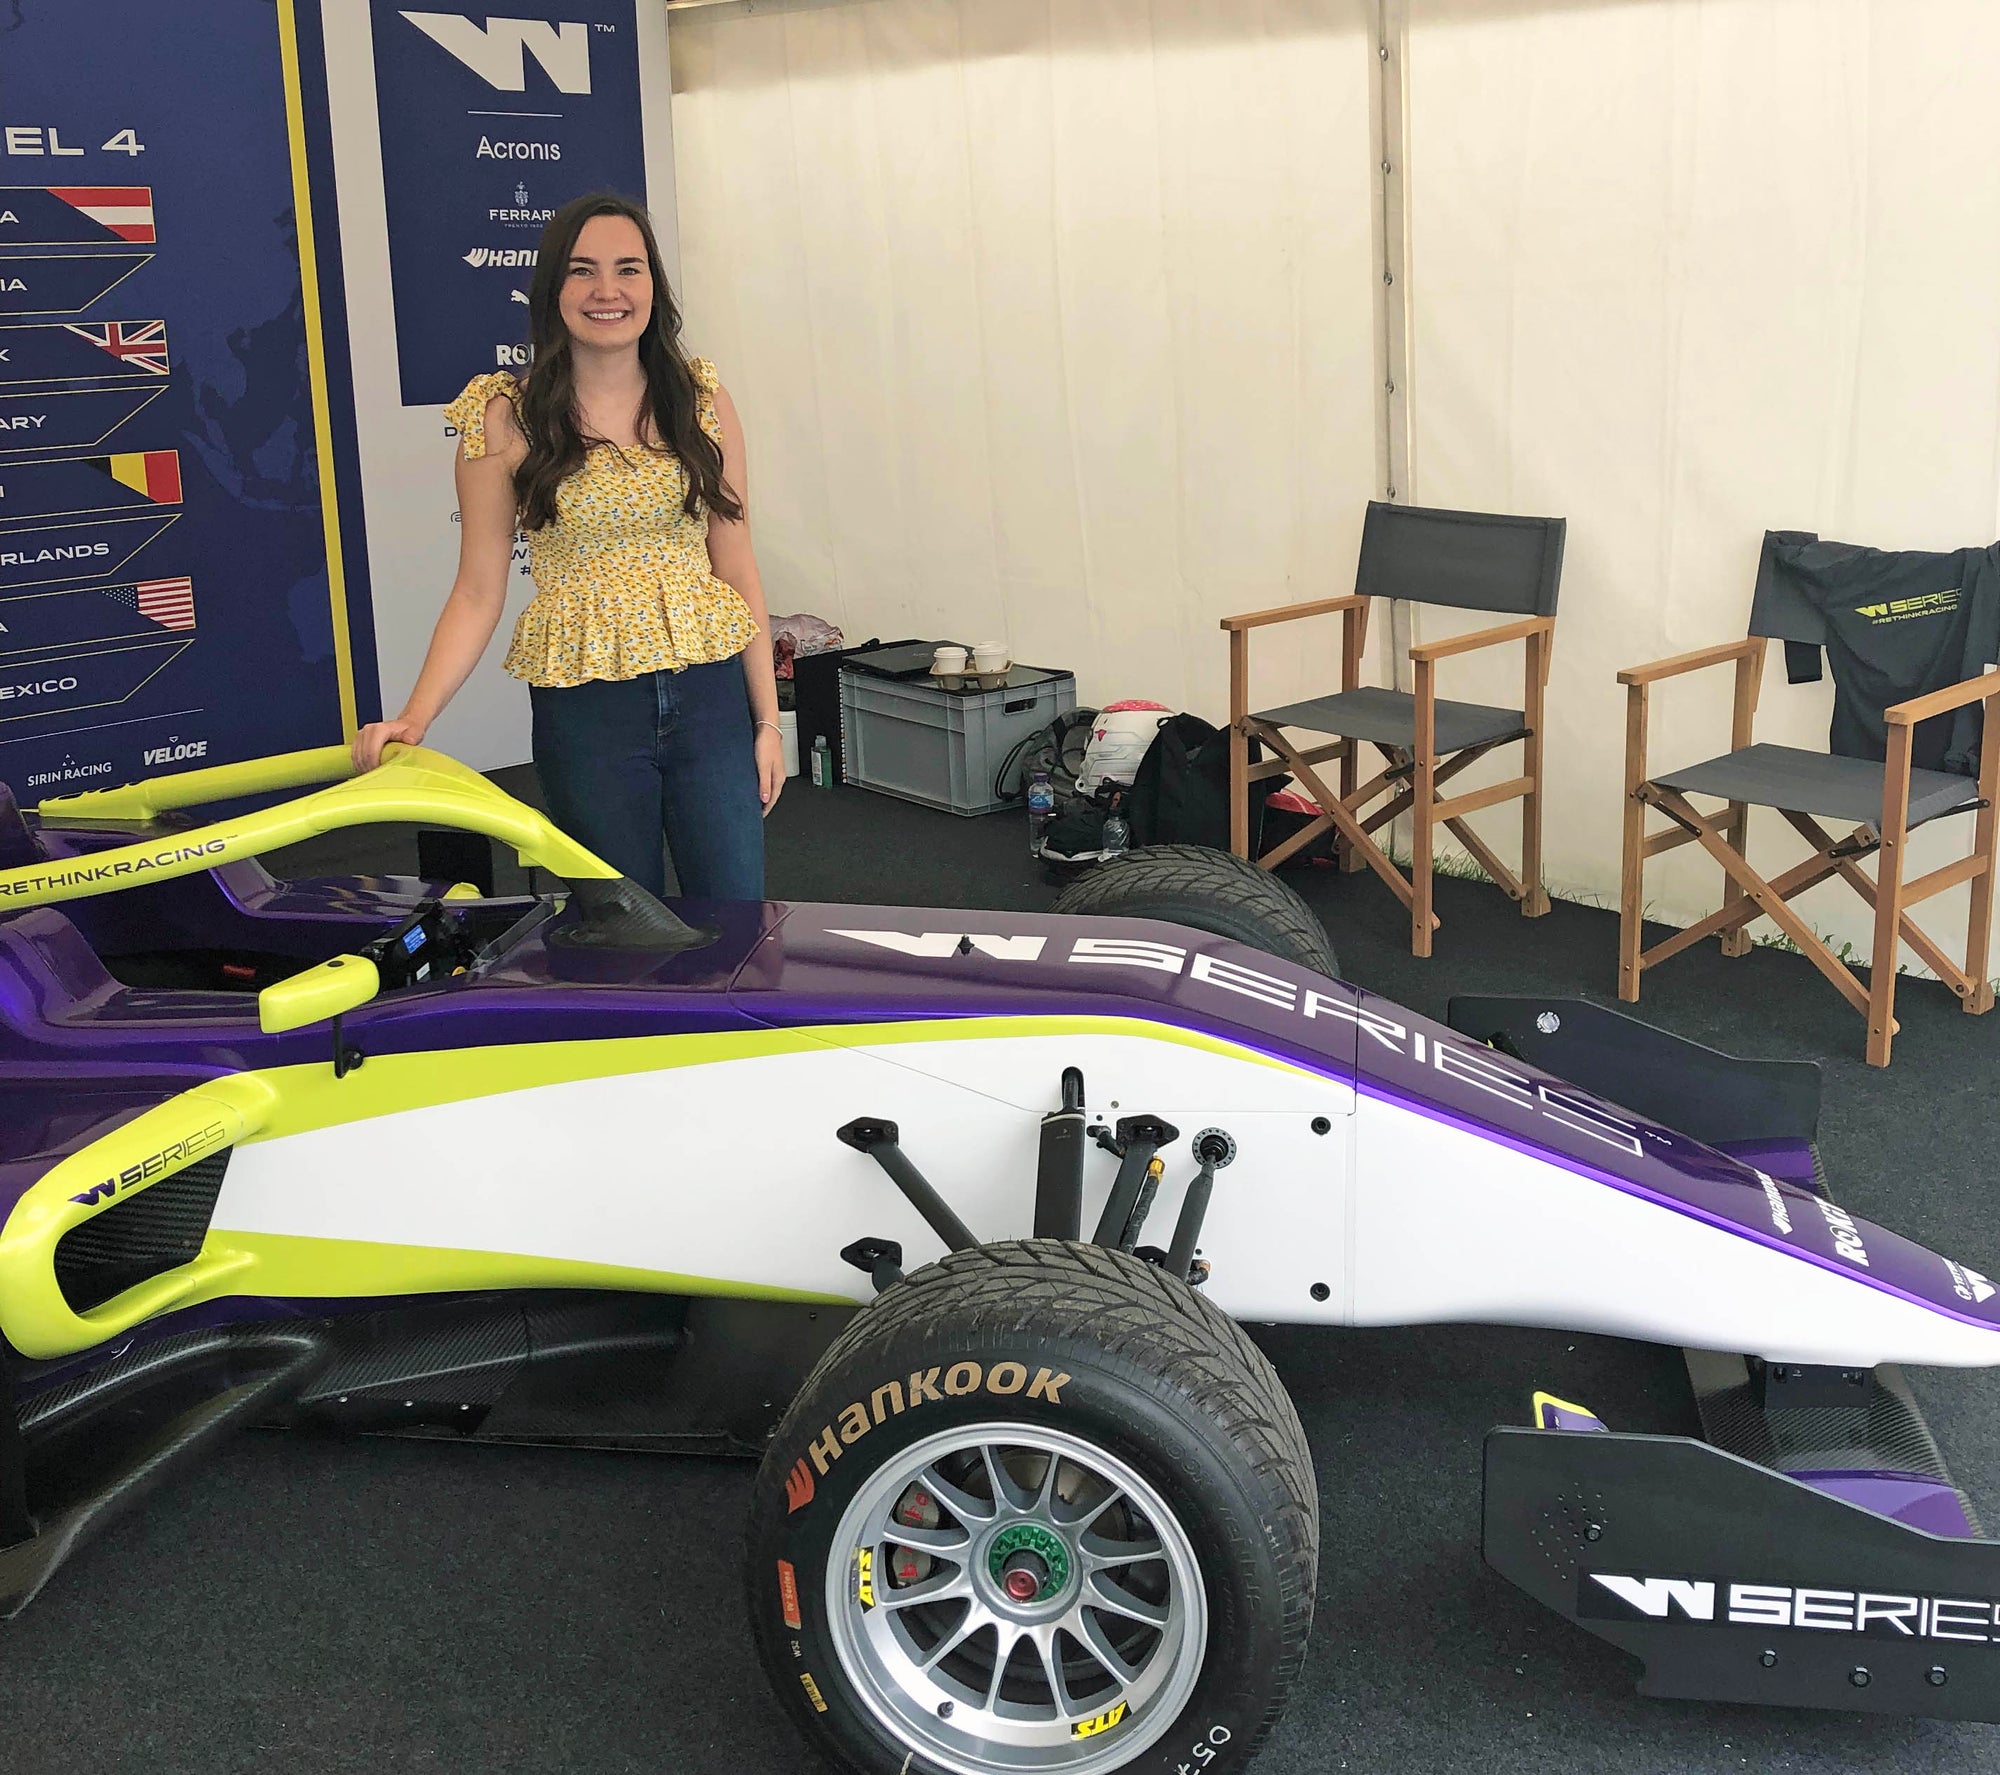 Isla from Lewis is blazing a trail for women in motorsports